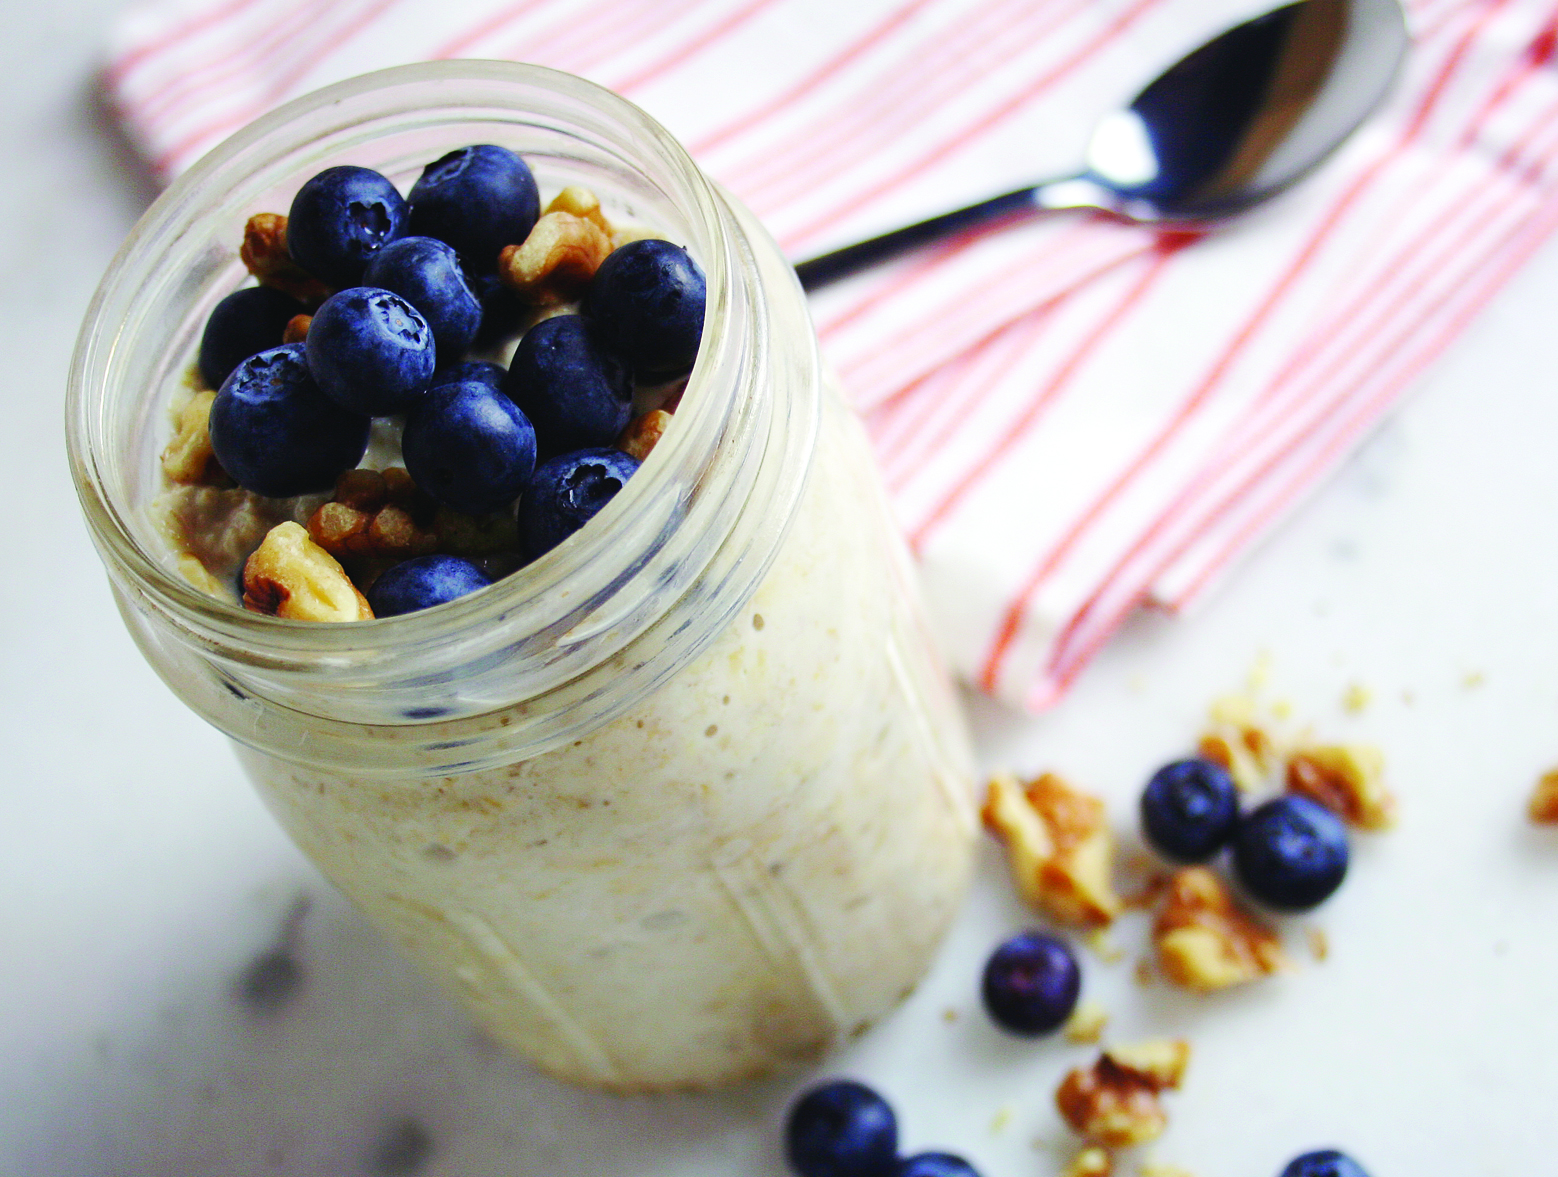 A jar of overnight oats made with egg whites and topped with blueberries